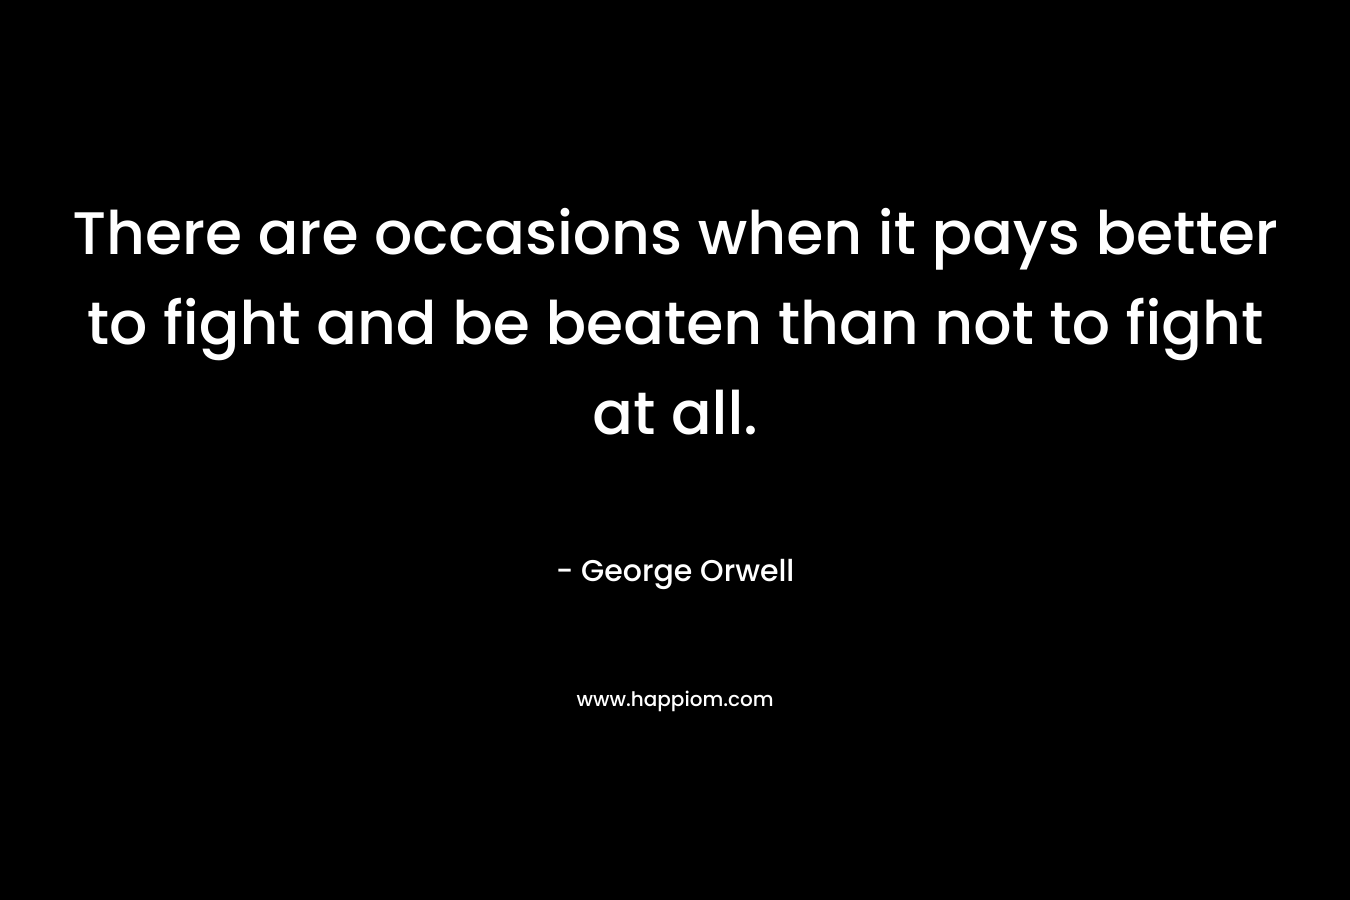 There are occasions when it pays better to fight and be beaten than not to fight at all. – George Orwell